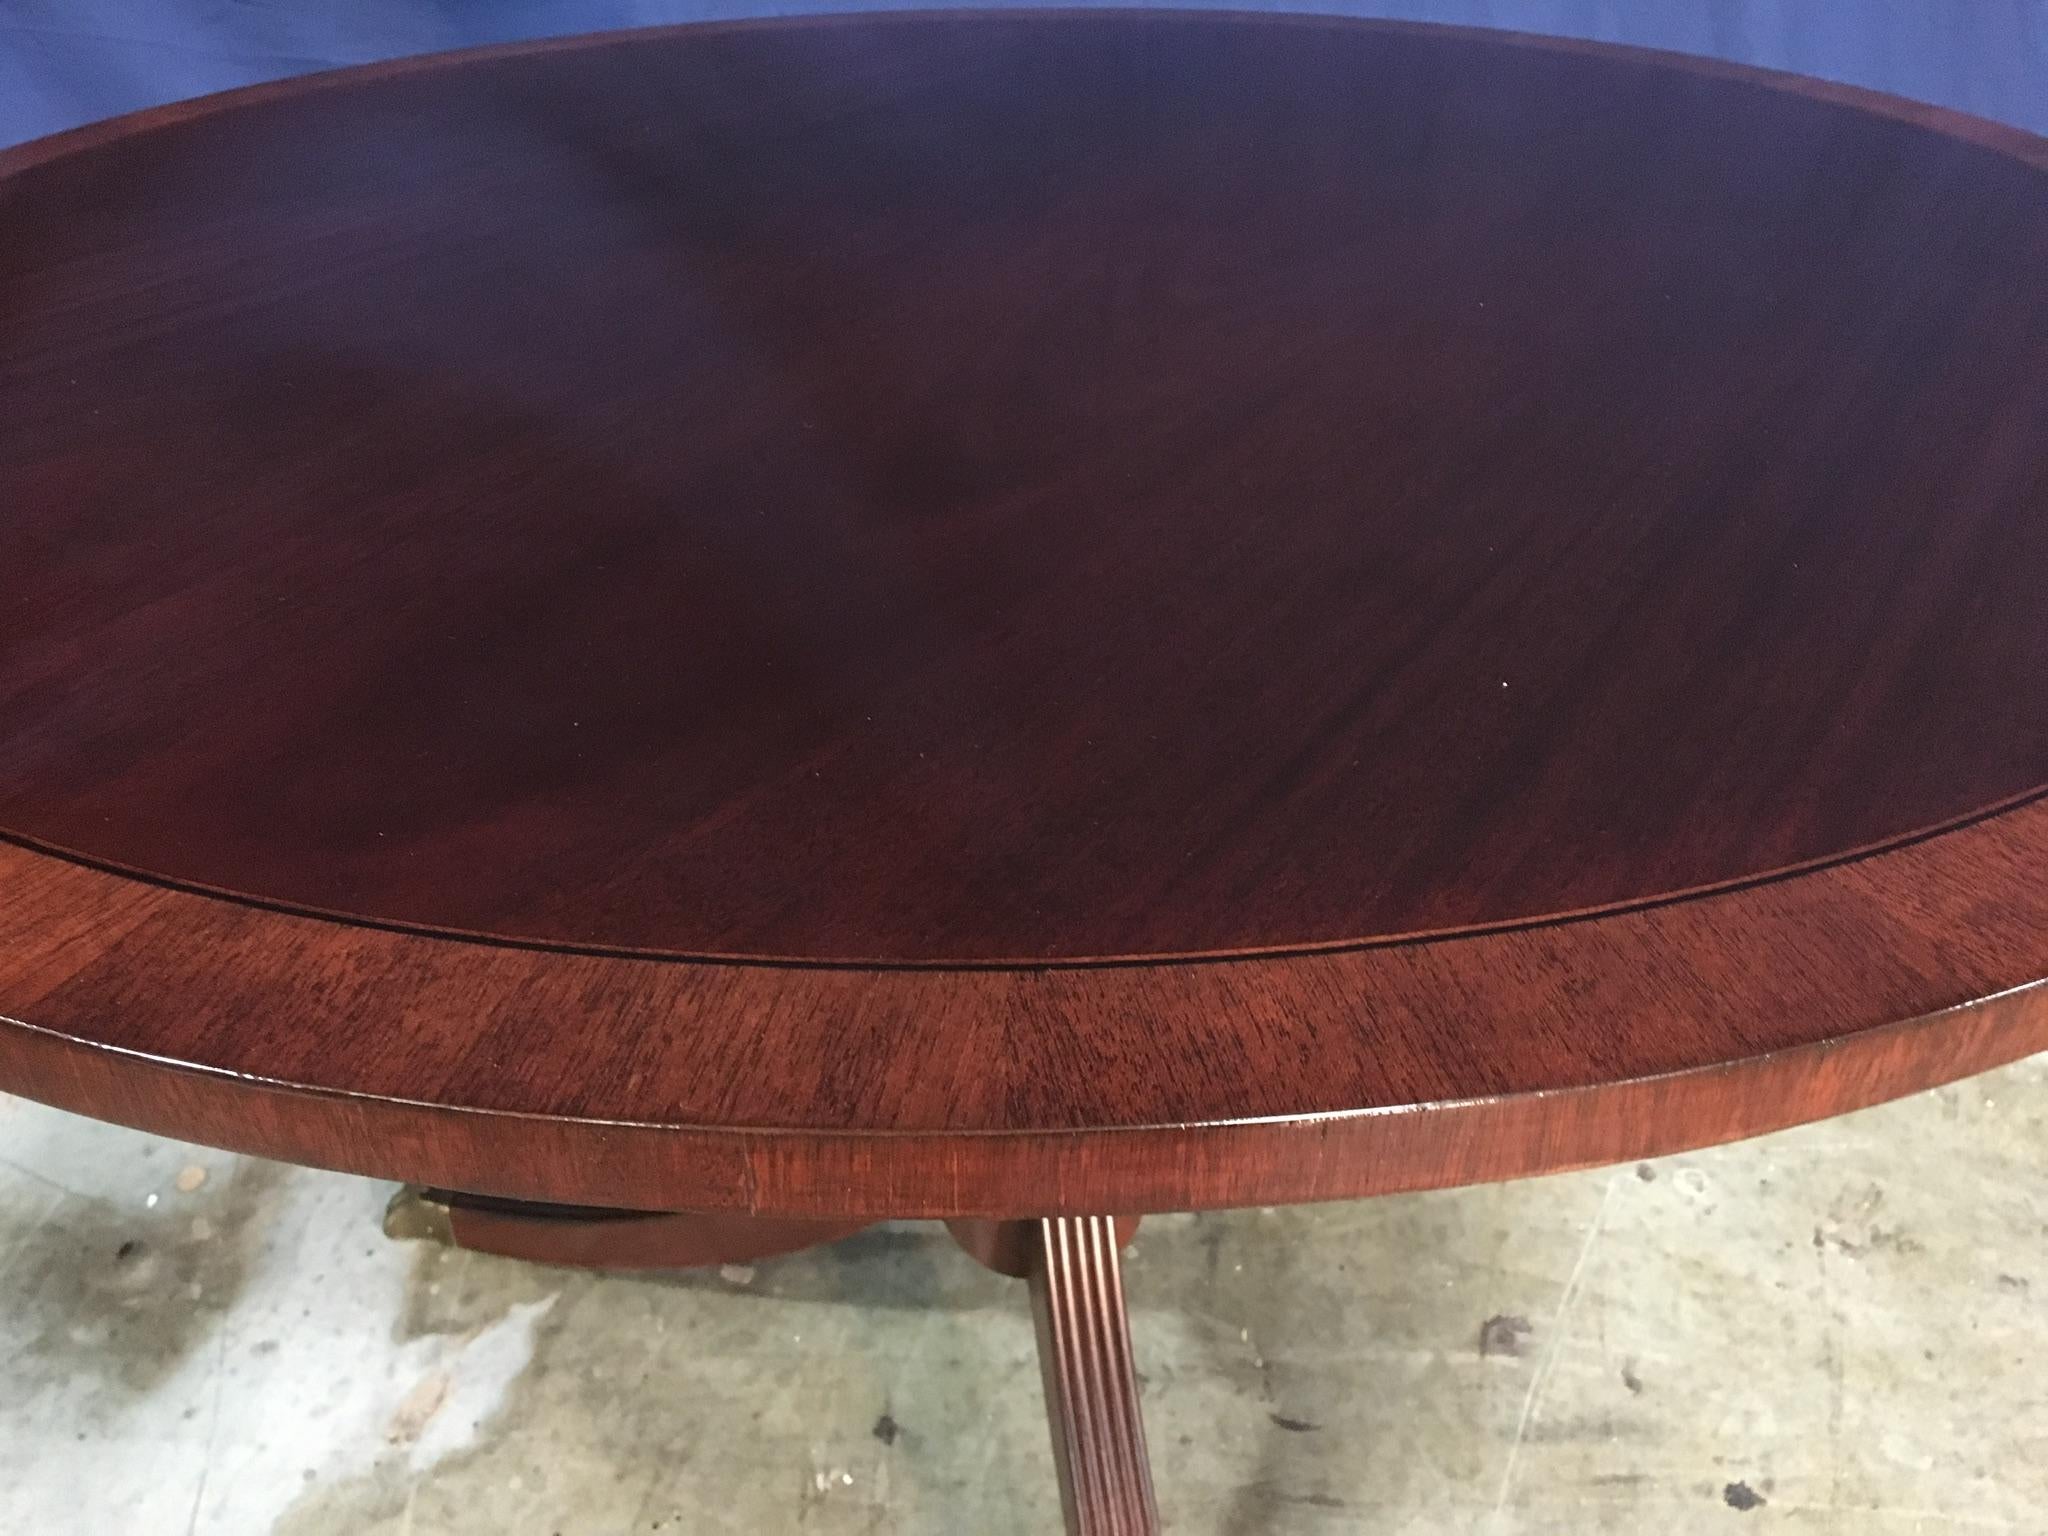 Contemporary Round Banded Mahogany Georgian Style Accent Foyer Table by Leighton Hall For Sale